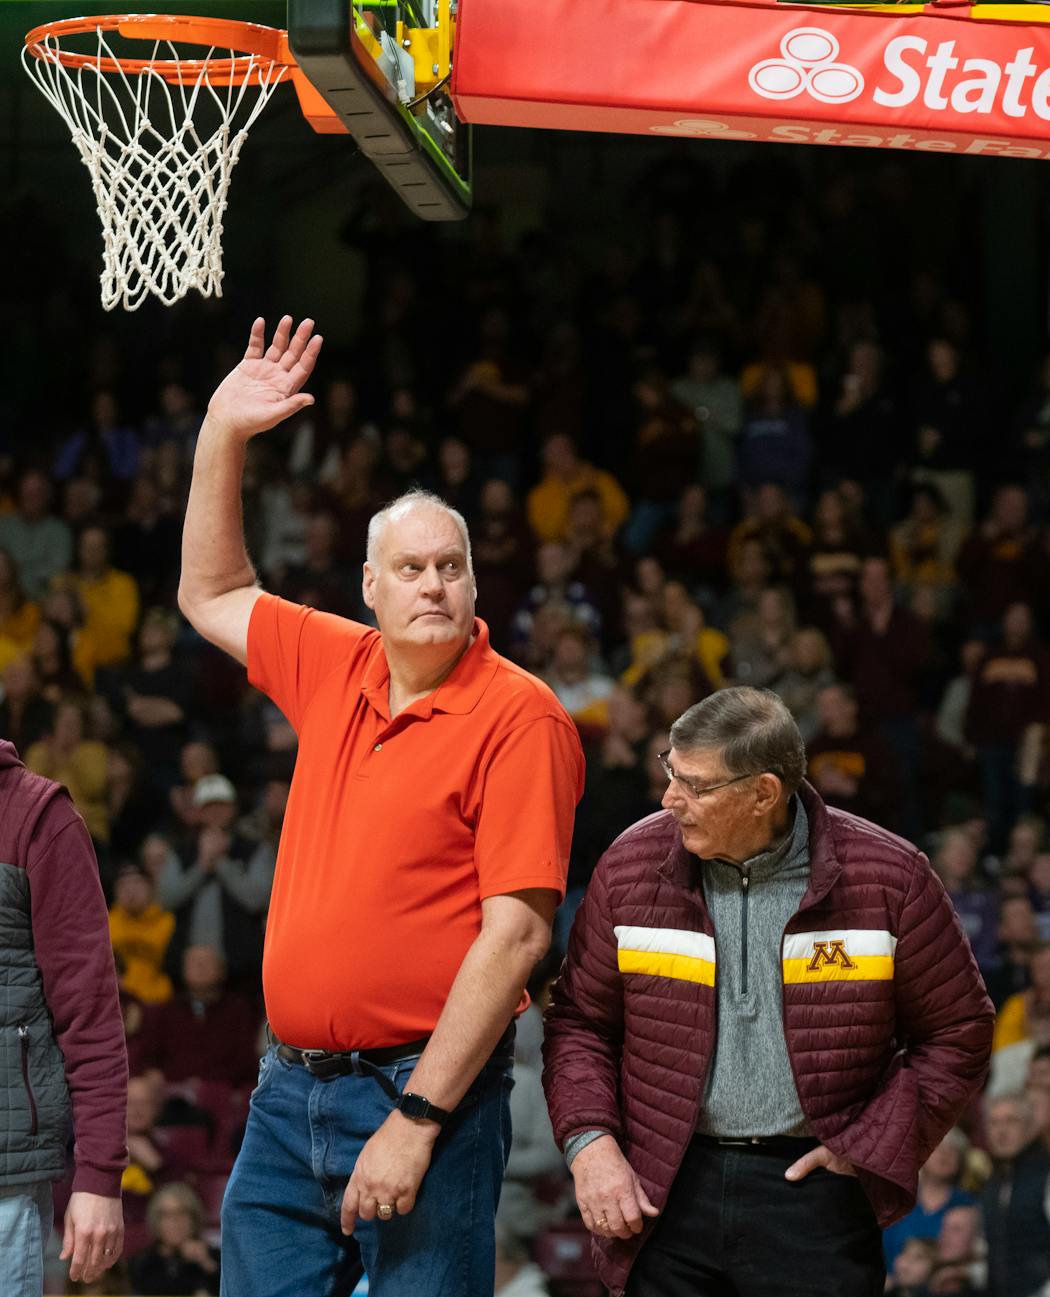 Minnesota basketball legend Randy Breuer gestures to the crowd while being recognized at halftime on alumni day Saturday.